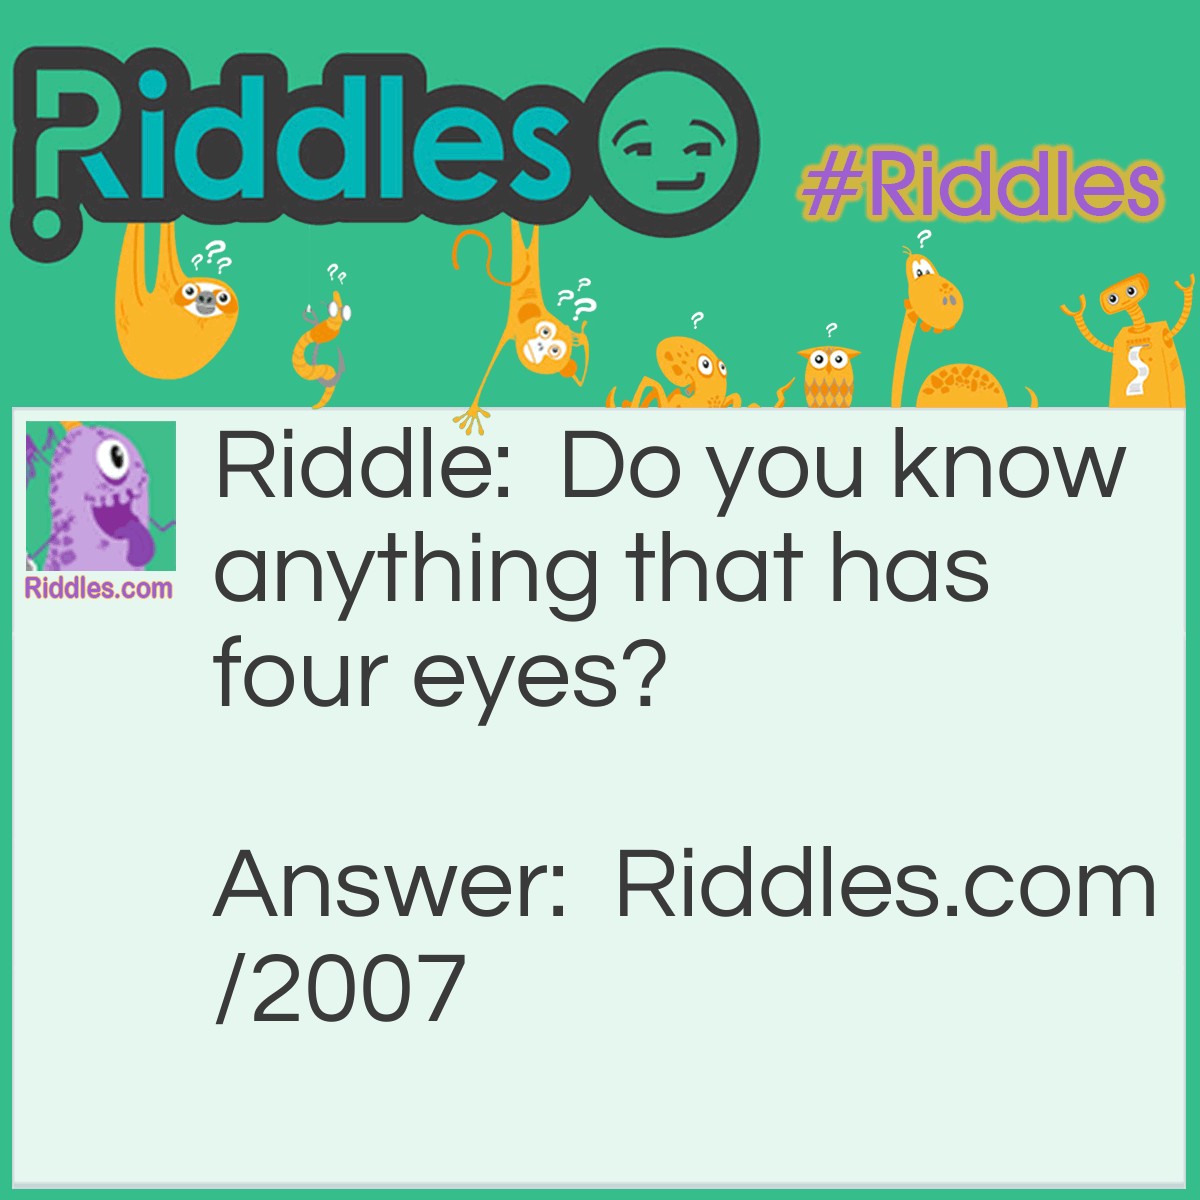 Riddle: Do you know anything that has four eyes? Answer: Yes, Mississippi.